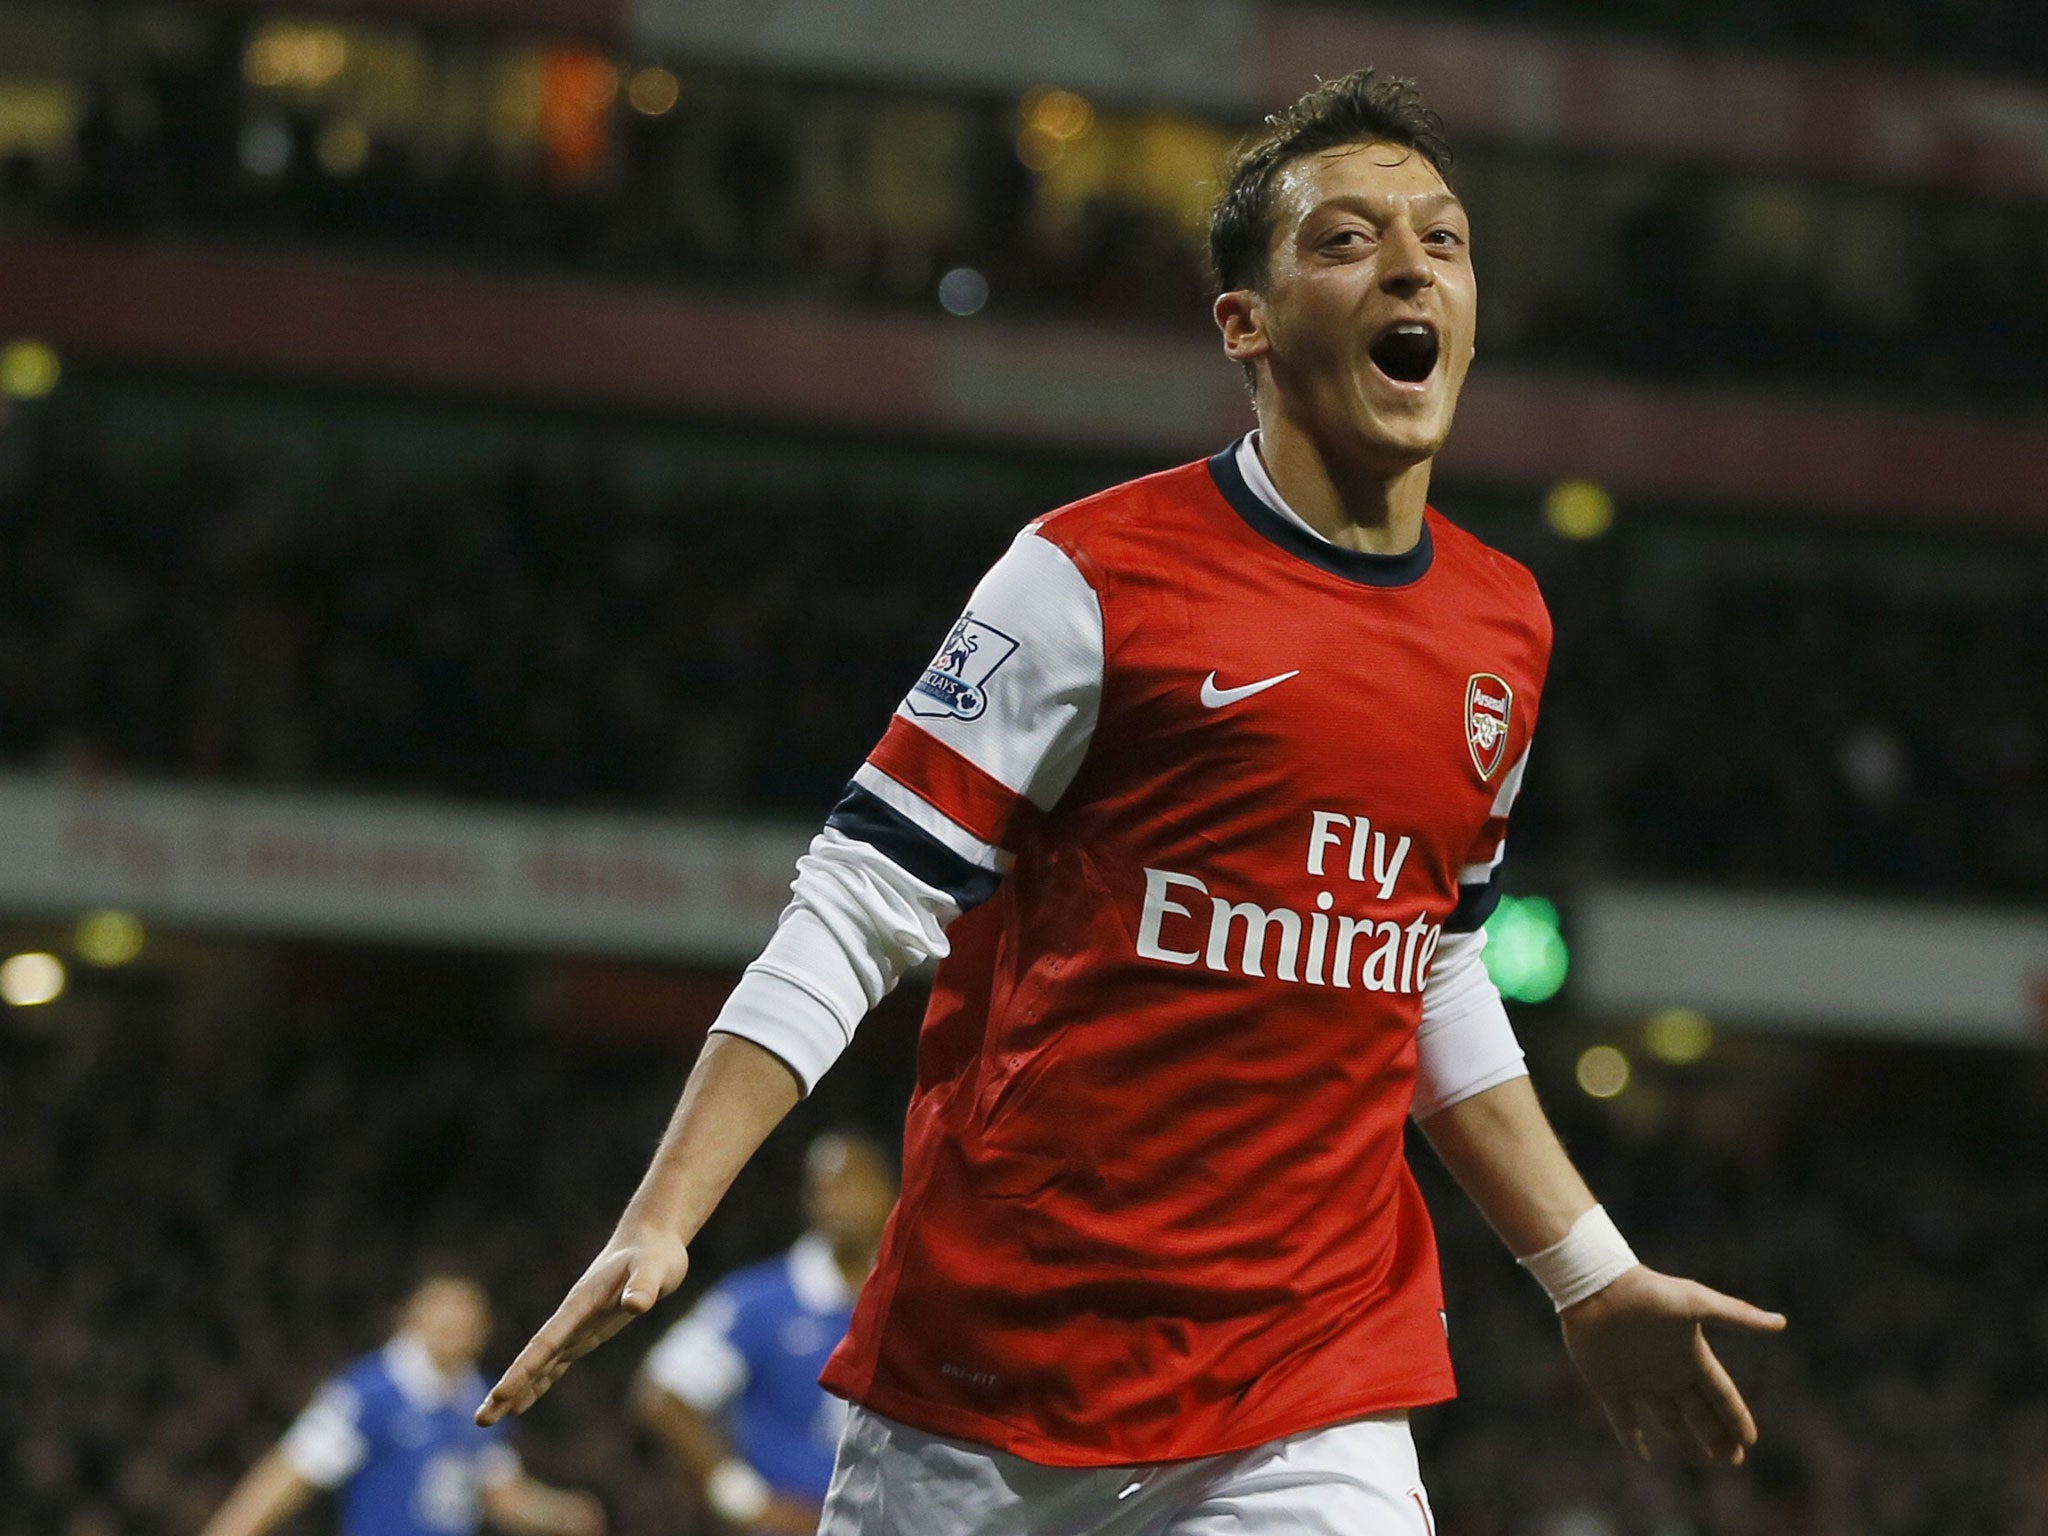 Mesut Ozil's Arsenal could go top of the league for Christmas with a win over Chelsea on Monday night